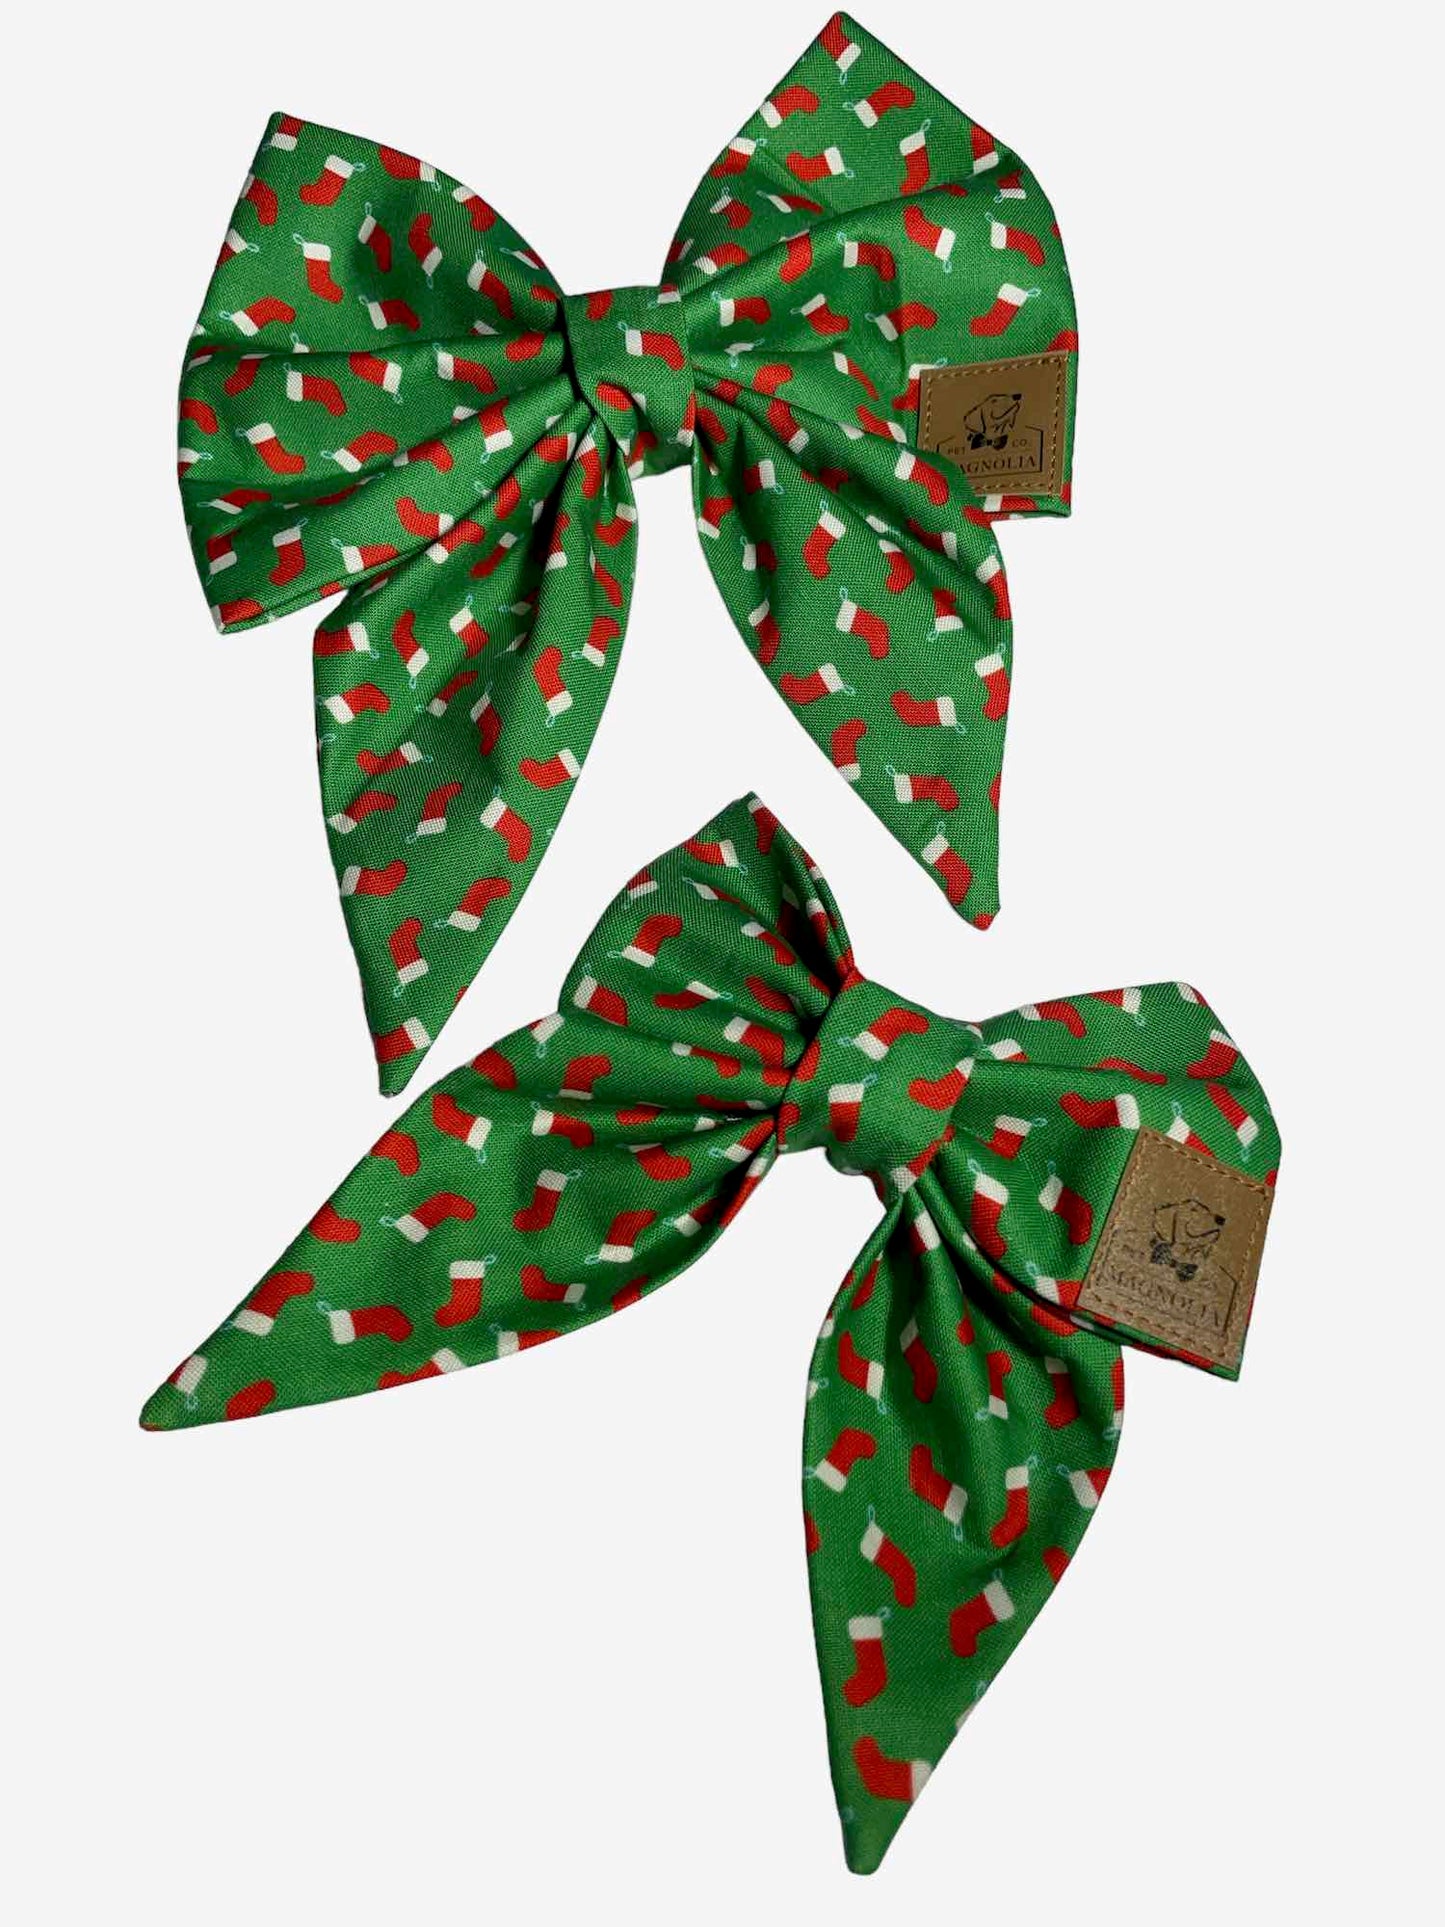 Stockings on Green Bow